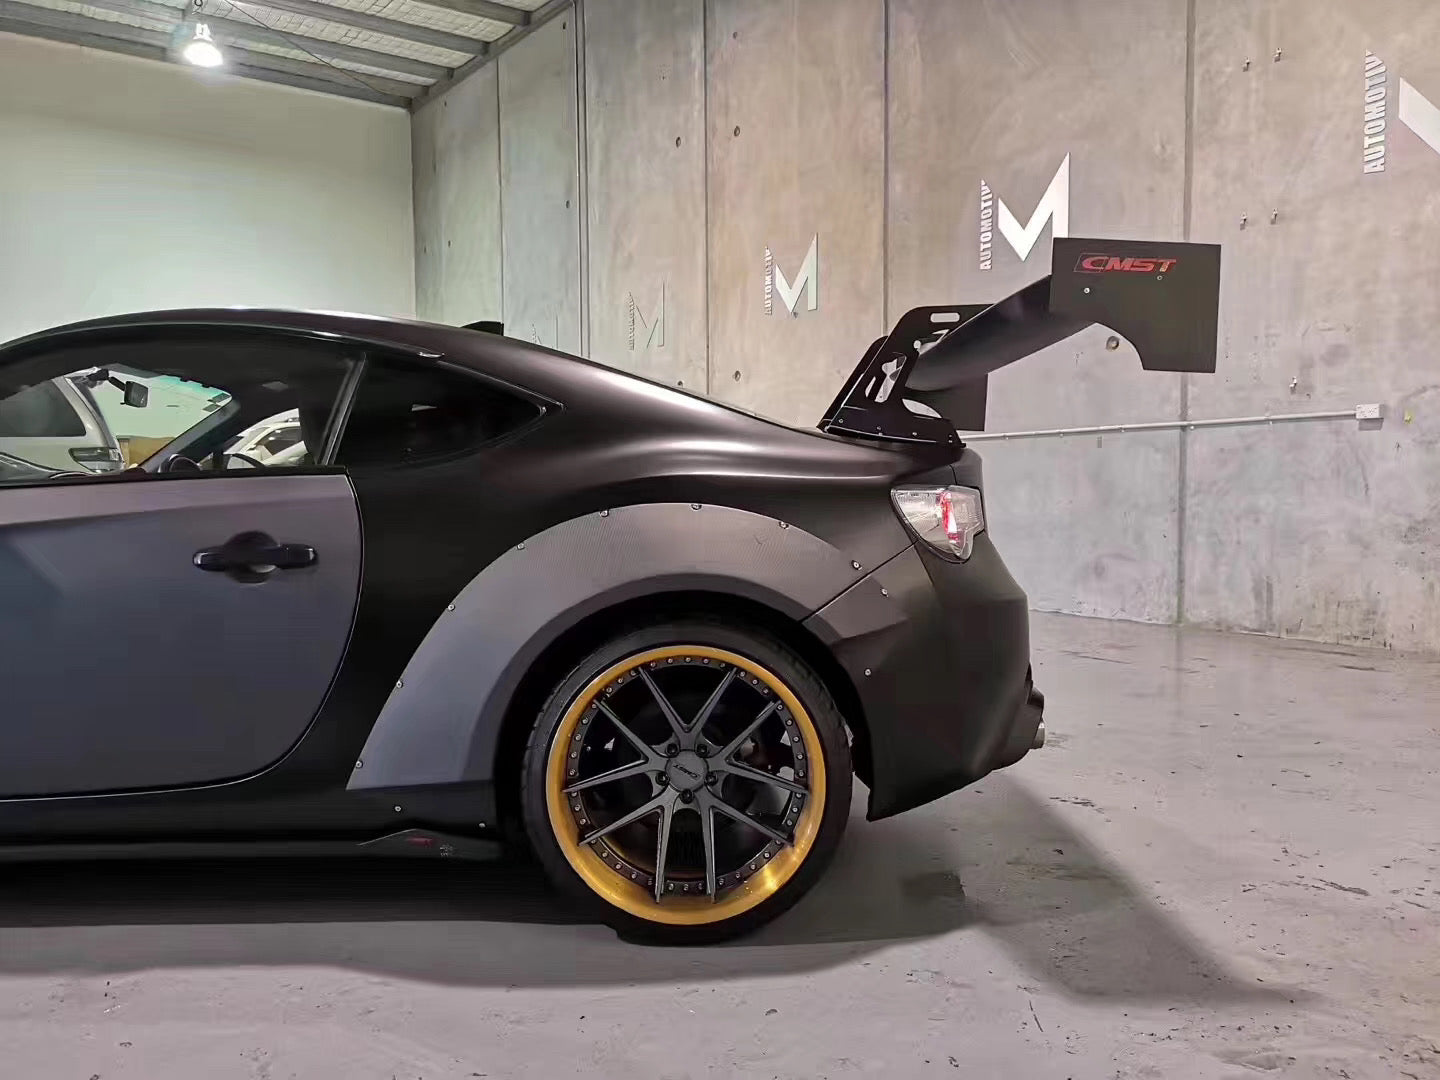 Check our price and buy CMST Carbon Fiber WideBody Kit set "JOKER" for Toyota 86 GT86